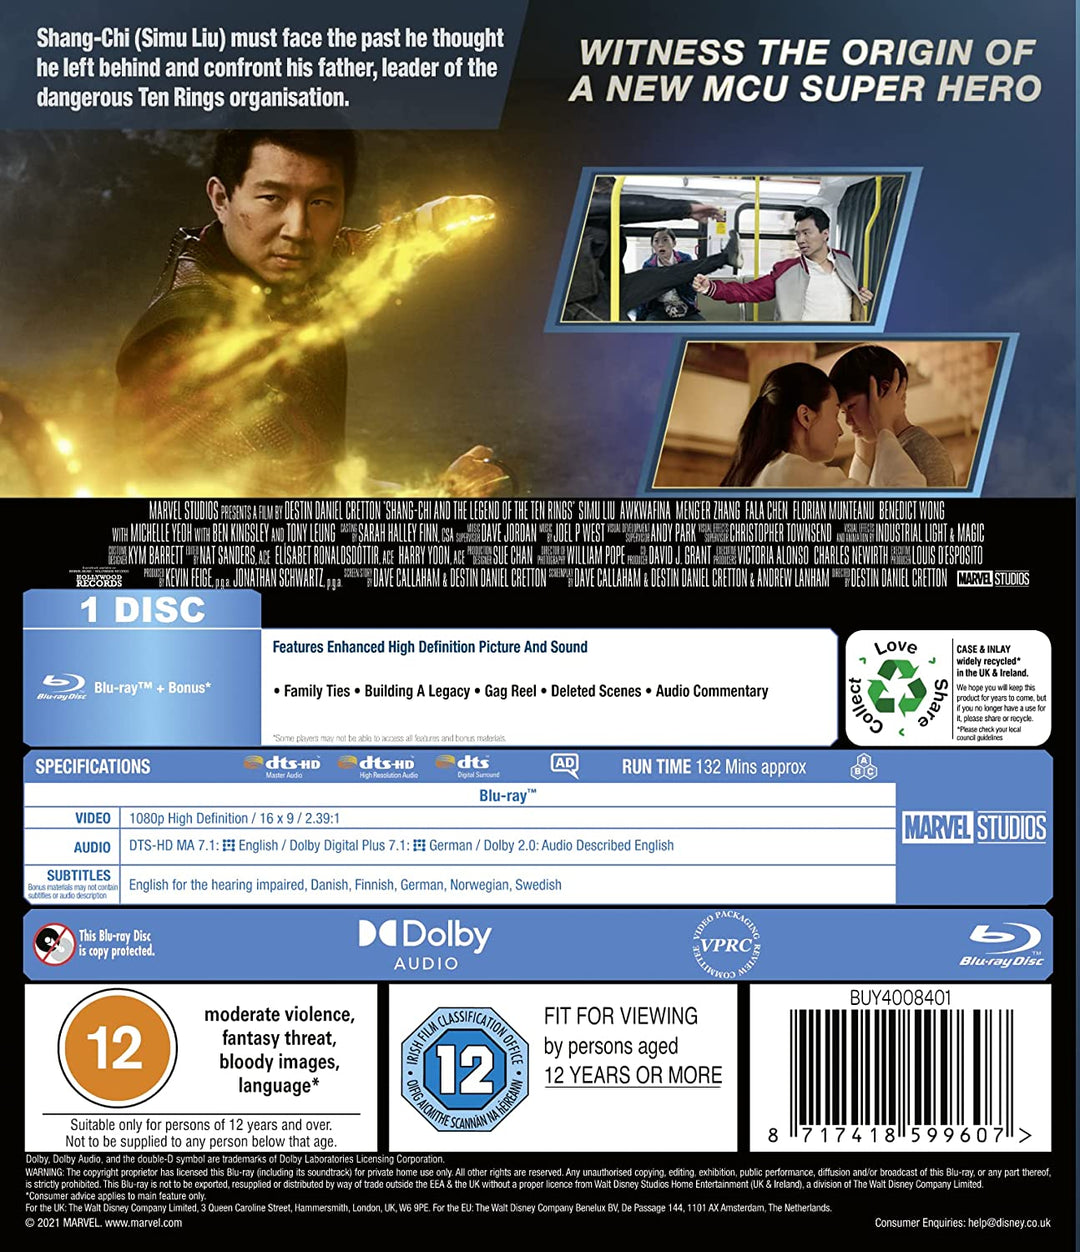 Marvel Studios Shang-Chi and the Legend of the Ten Rings [2021] [Region - Action/Fantasy  [Blu-ray]